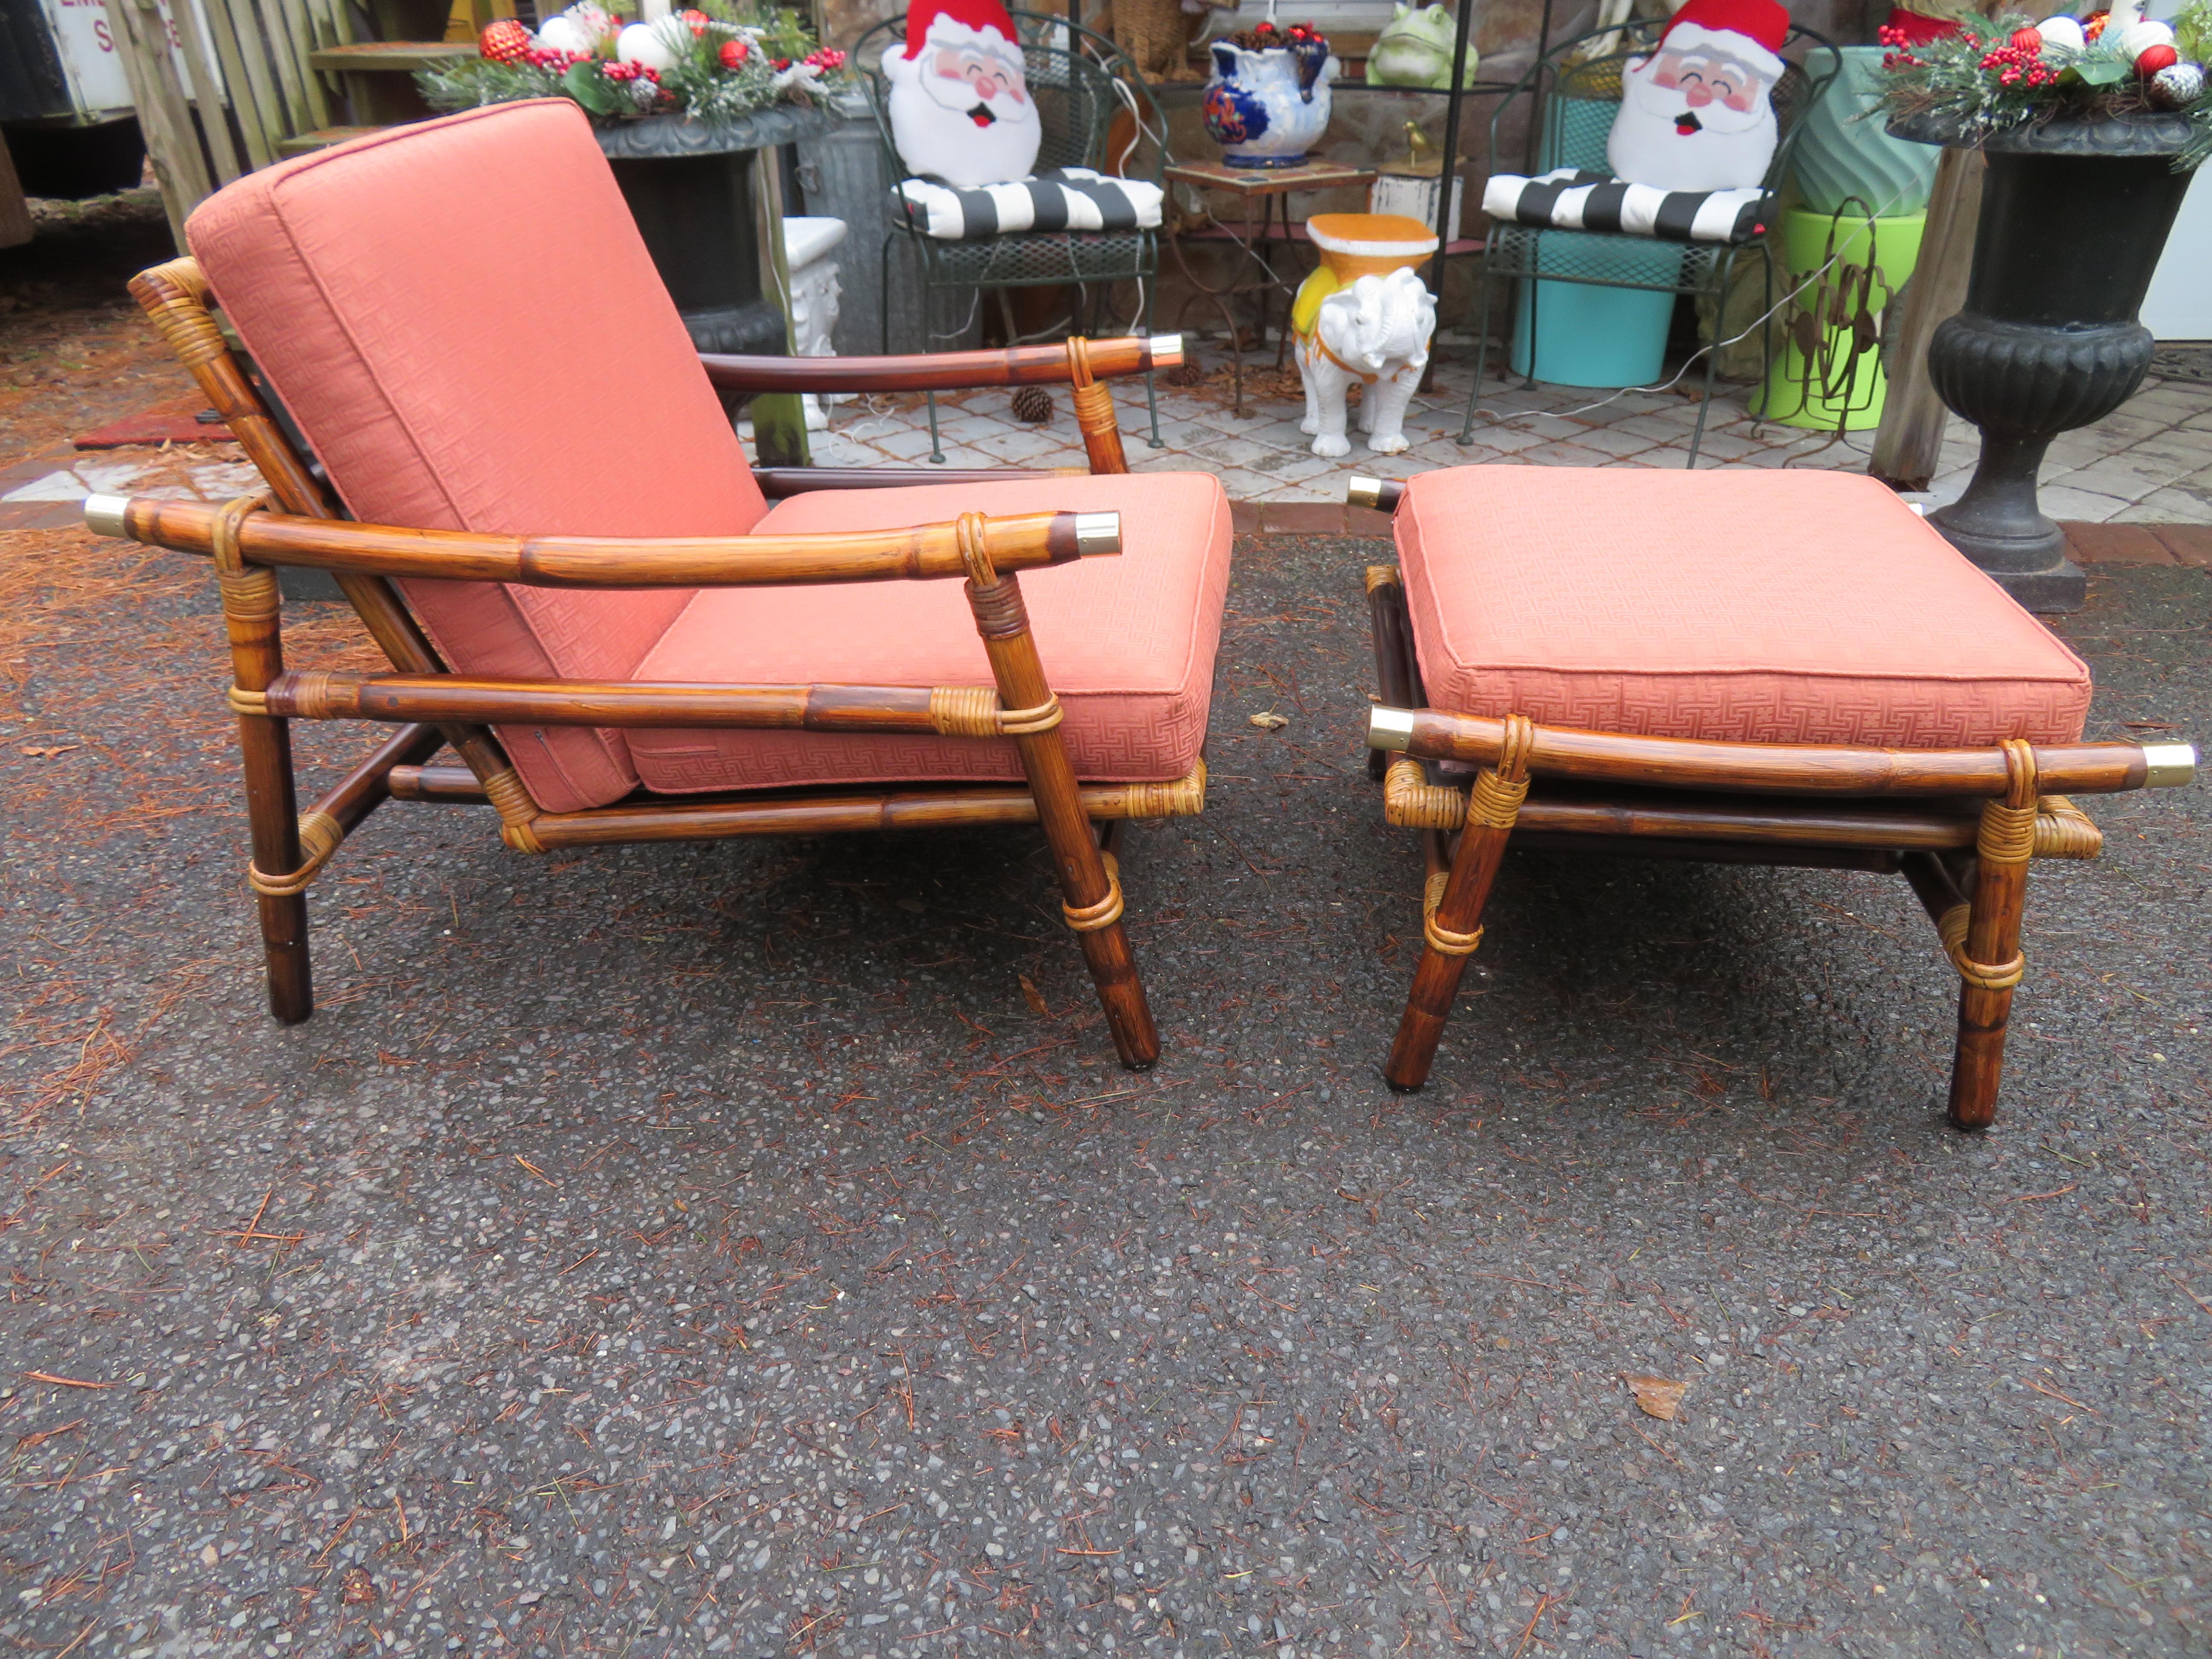 Ficks Reed rattan Campaign style lounge or club chair plus ottoman with interesting brass cap accents by John Wisner for the Far Horizons collection, 1954. This set retains its original finish in very nice vintage condition-one of the nicest we have